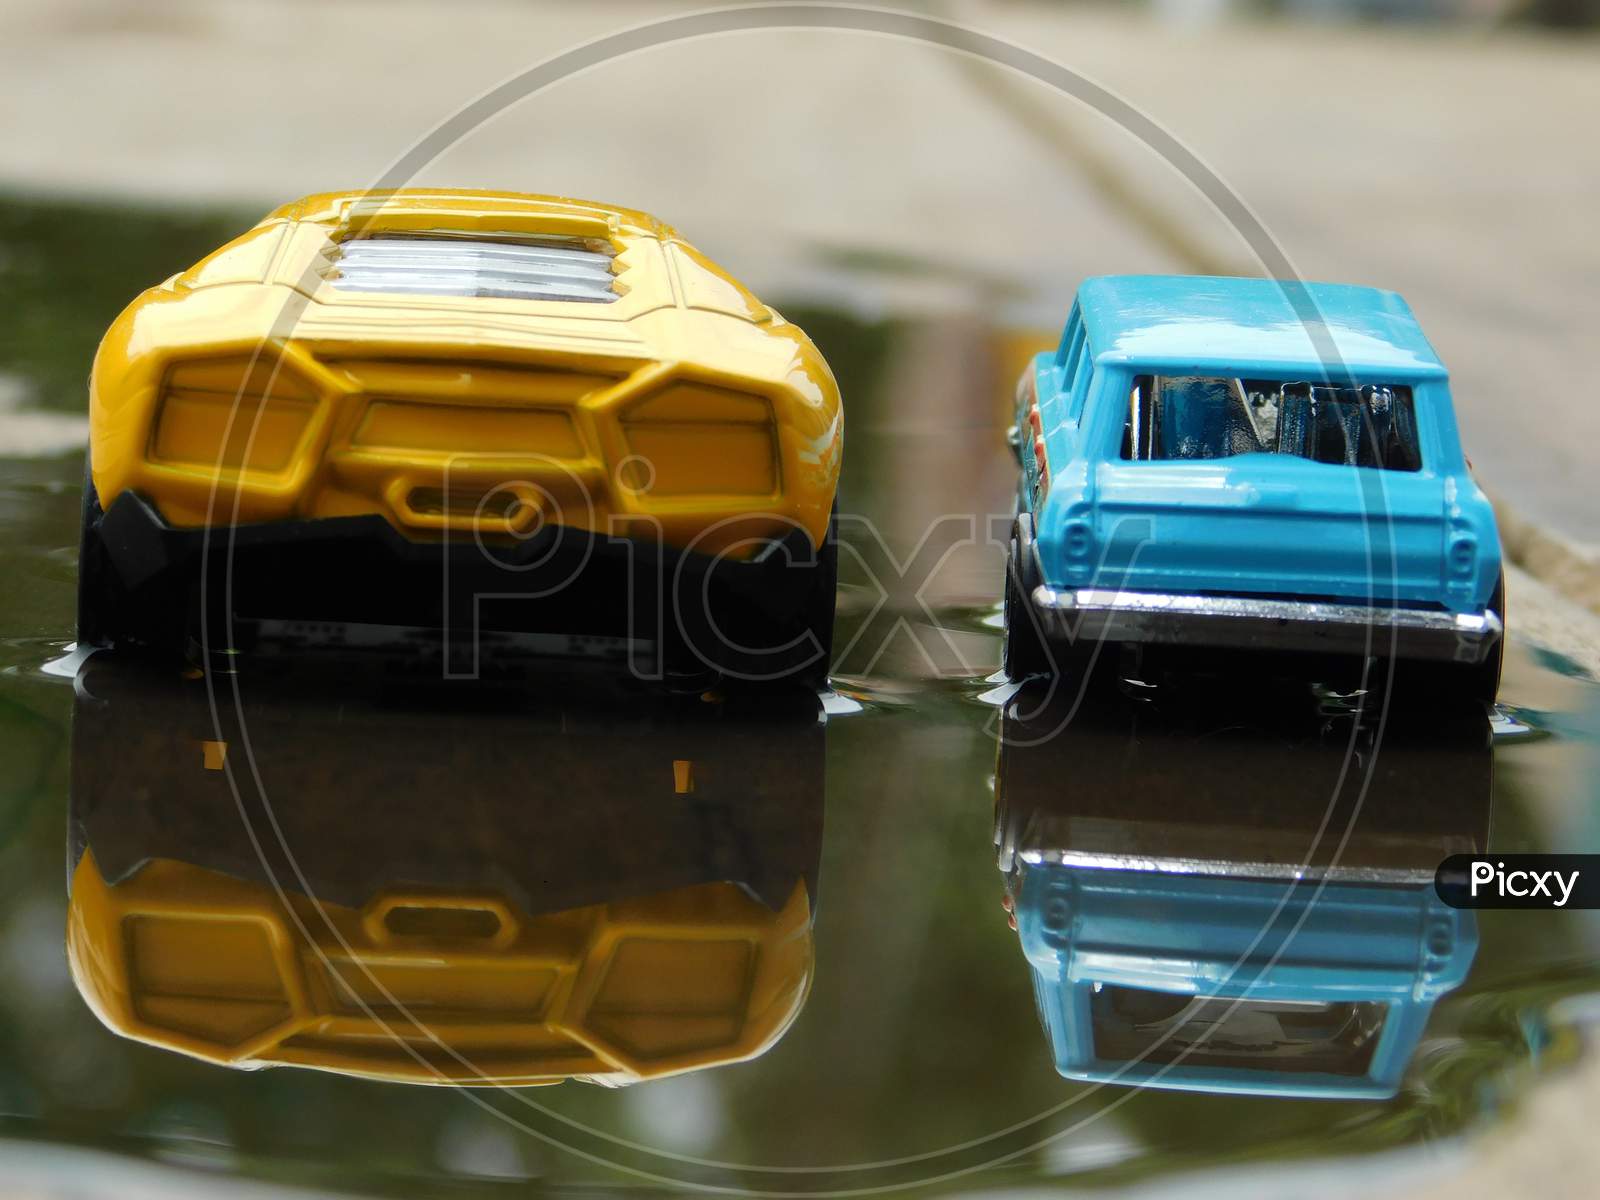 Yeloow and blue toy vehicle